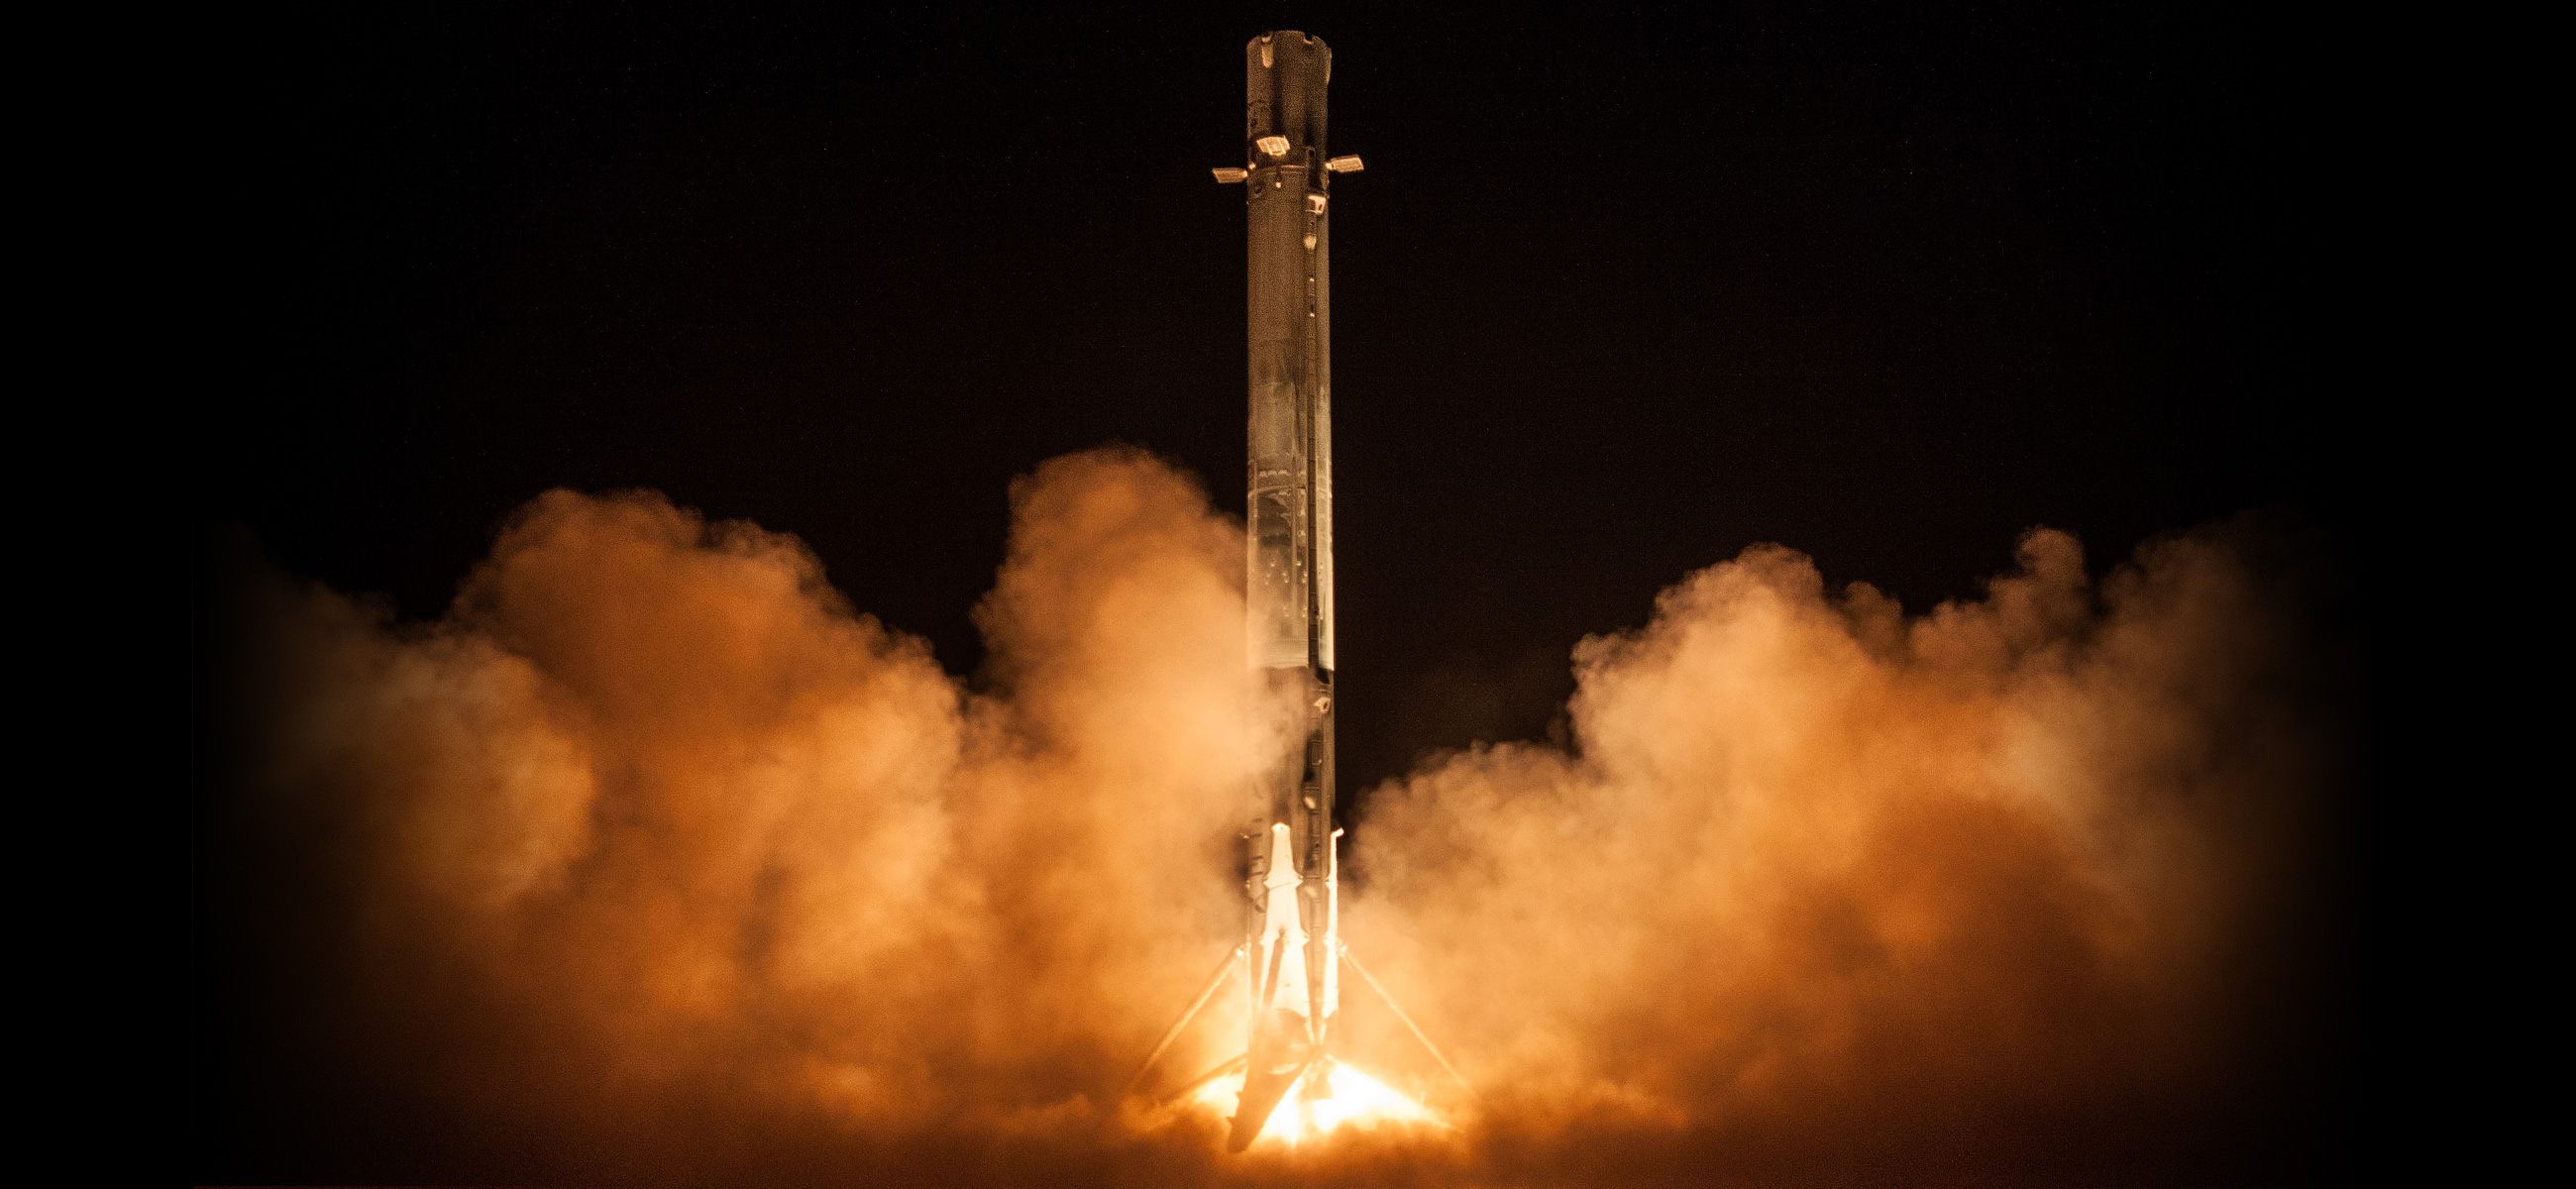 First Ukrainian satellite in 10 years launched by SpaceX (VIDEO)